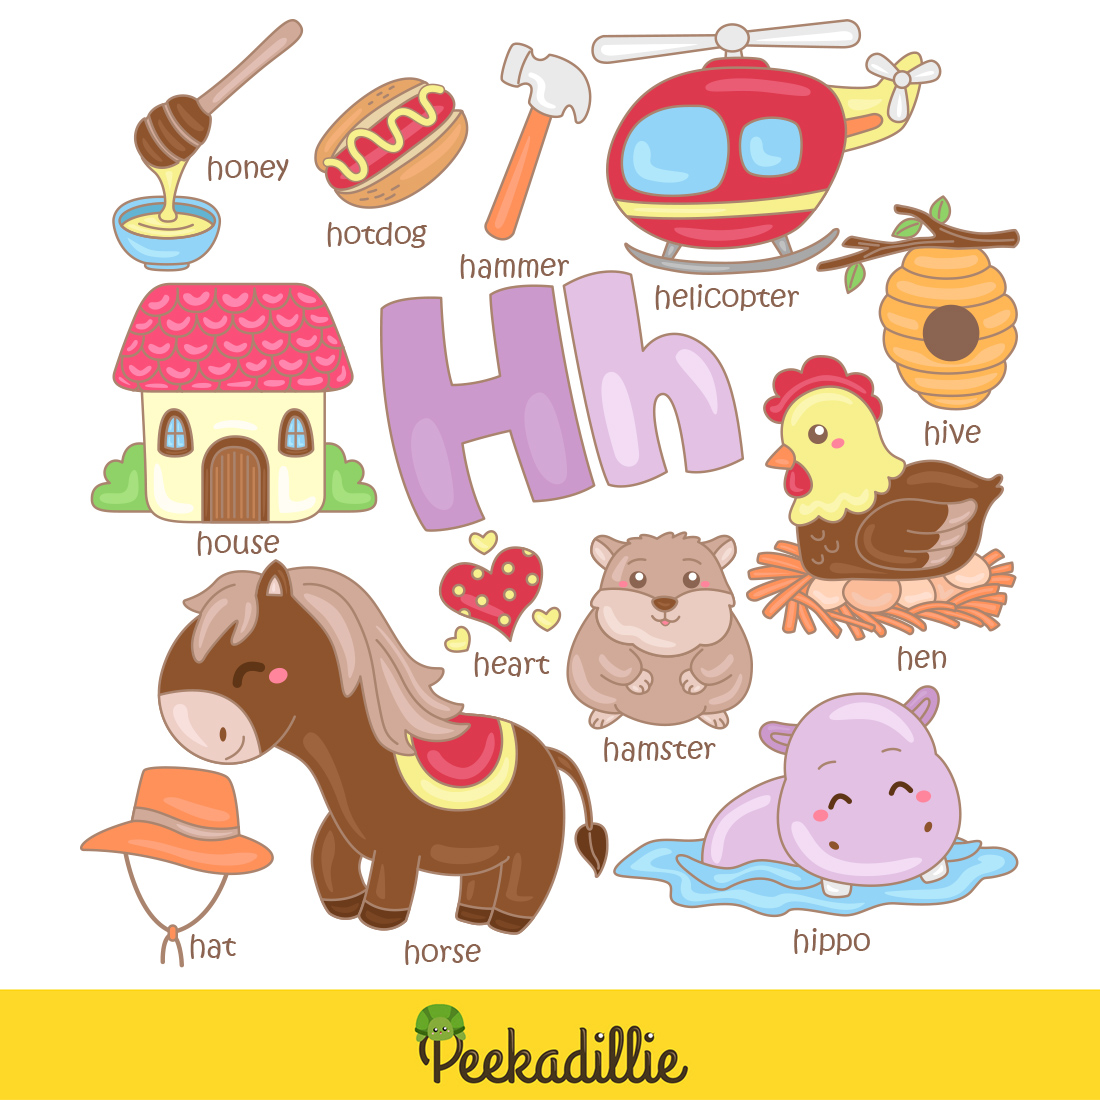 Alphabet H For Vocabulary School Letter Reading Writing Font Study Learning Student Toodler Kids Hive Hamster Heart Honey Horse House Hat Hotdog Hippo Helicopter Hen Cartoon Illustration Vector Clipart preview image.